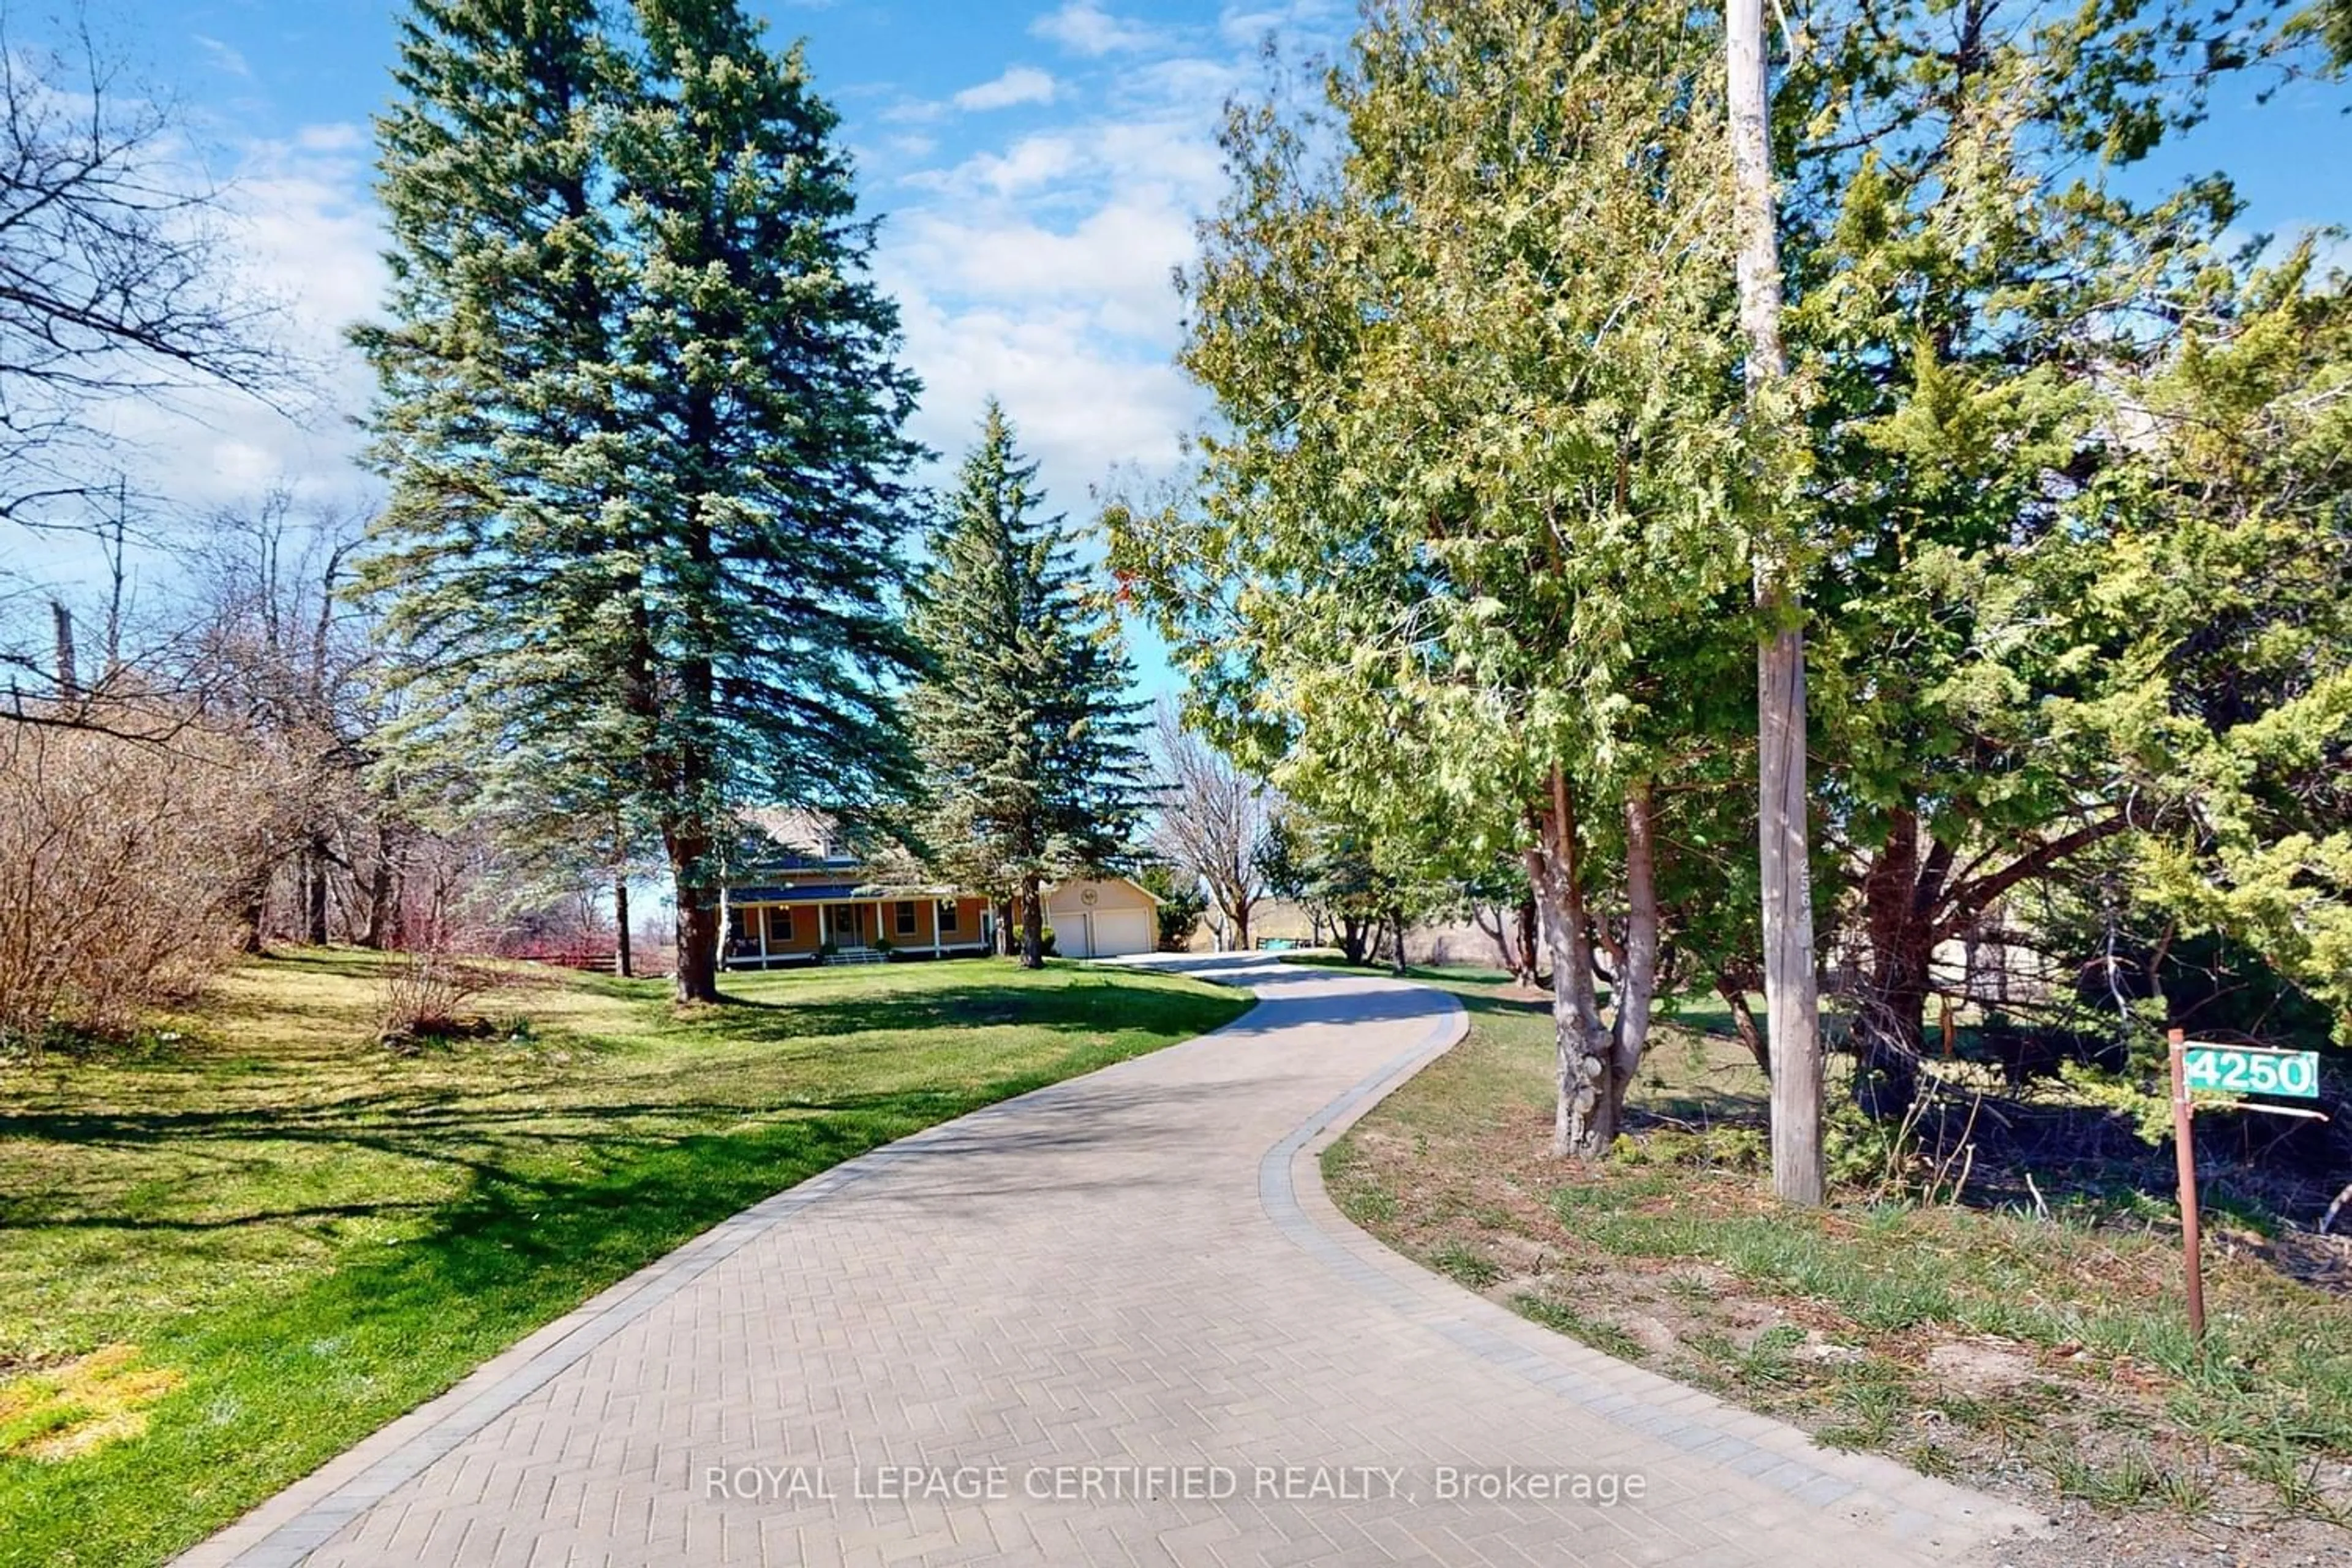 Street view for 4250 Beech Grove Side Rd, Caledon Ontario L7K 0M4